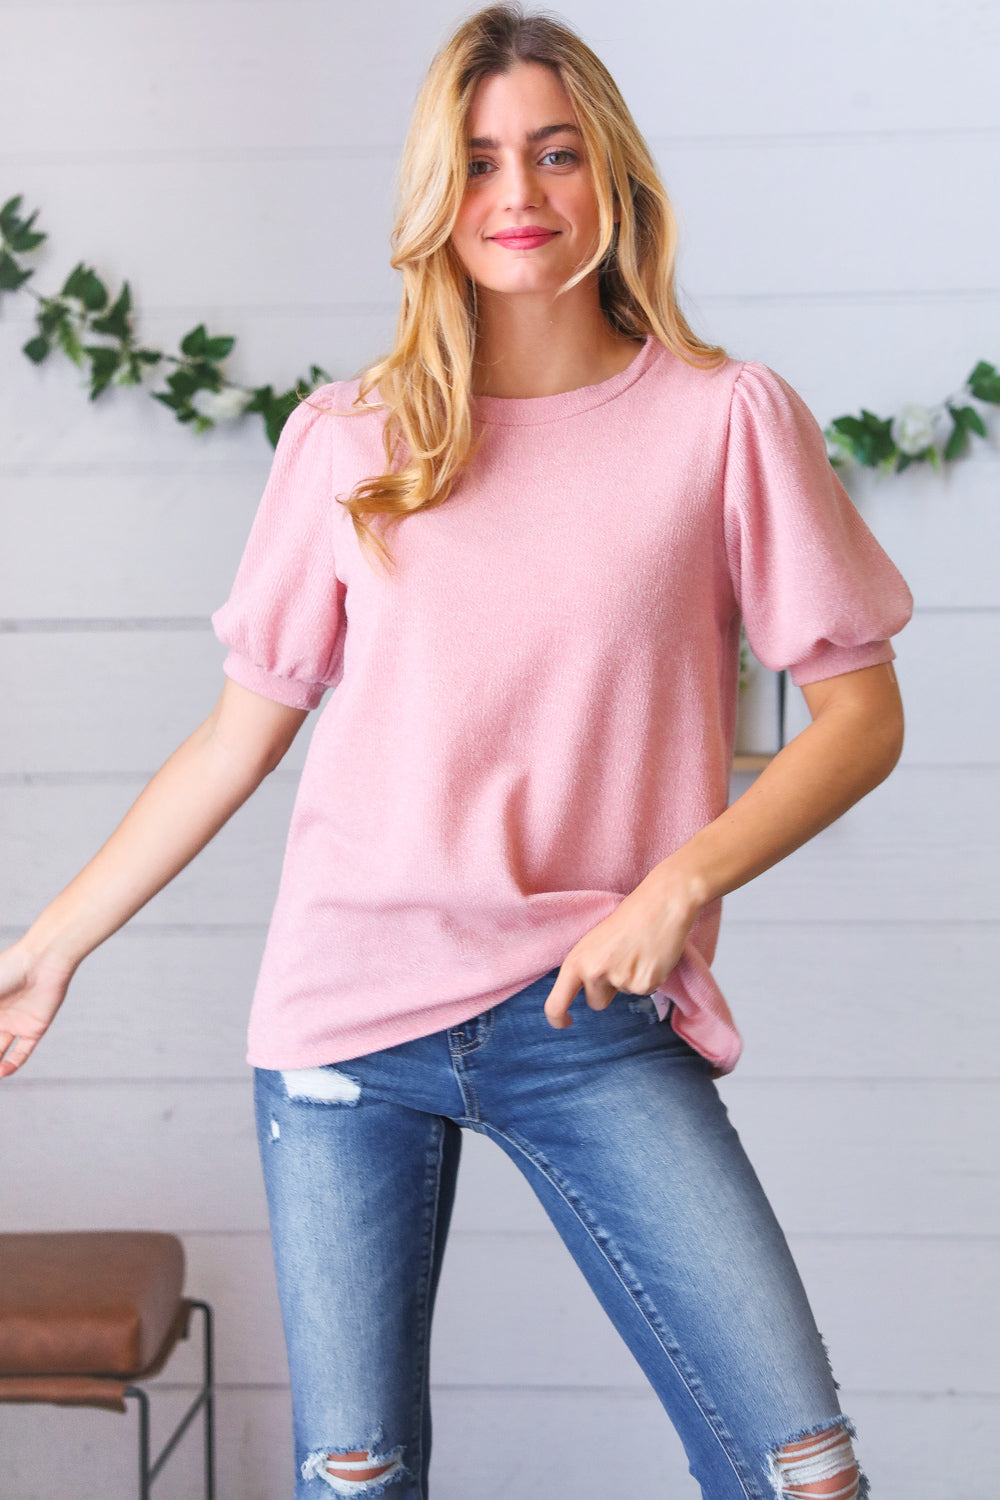 Baby Pink Puff Sleeve Two Tone Sweater Top - Sybaritic Bags & Clothing